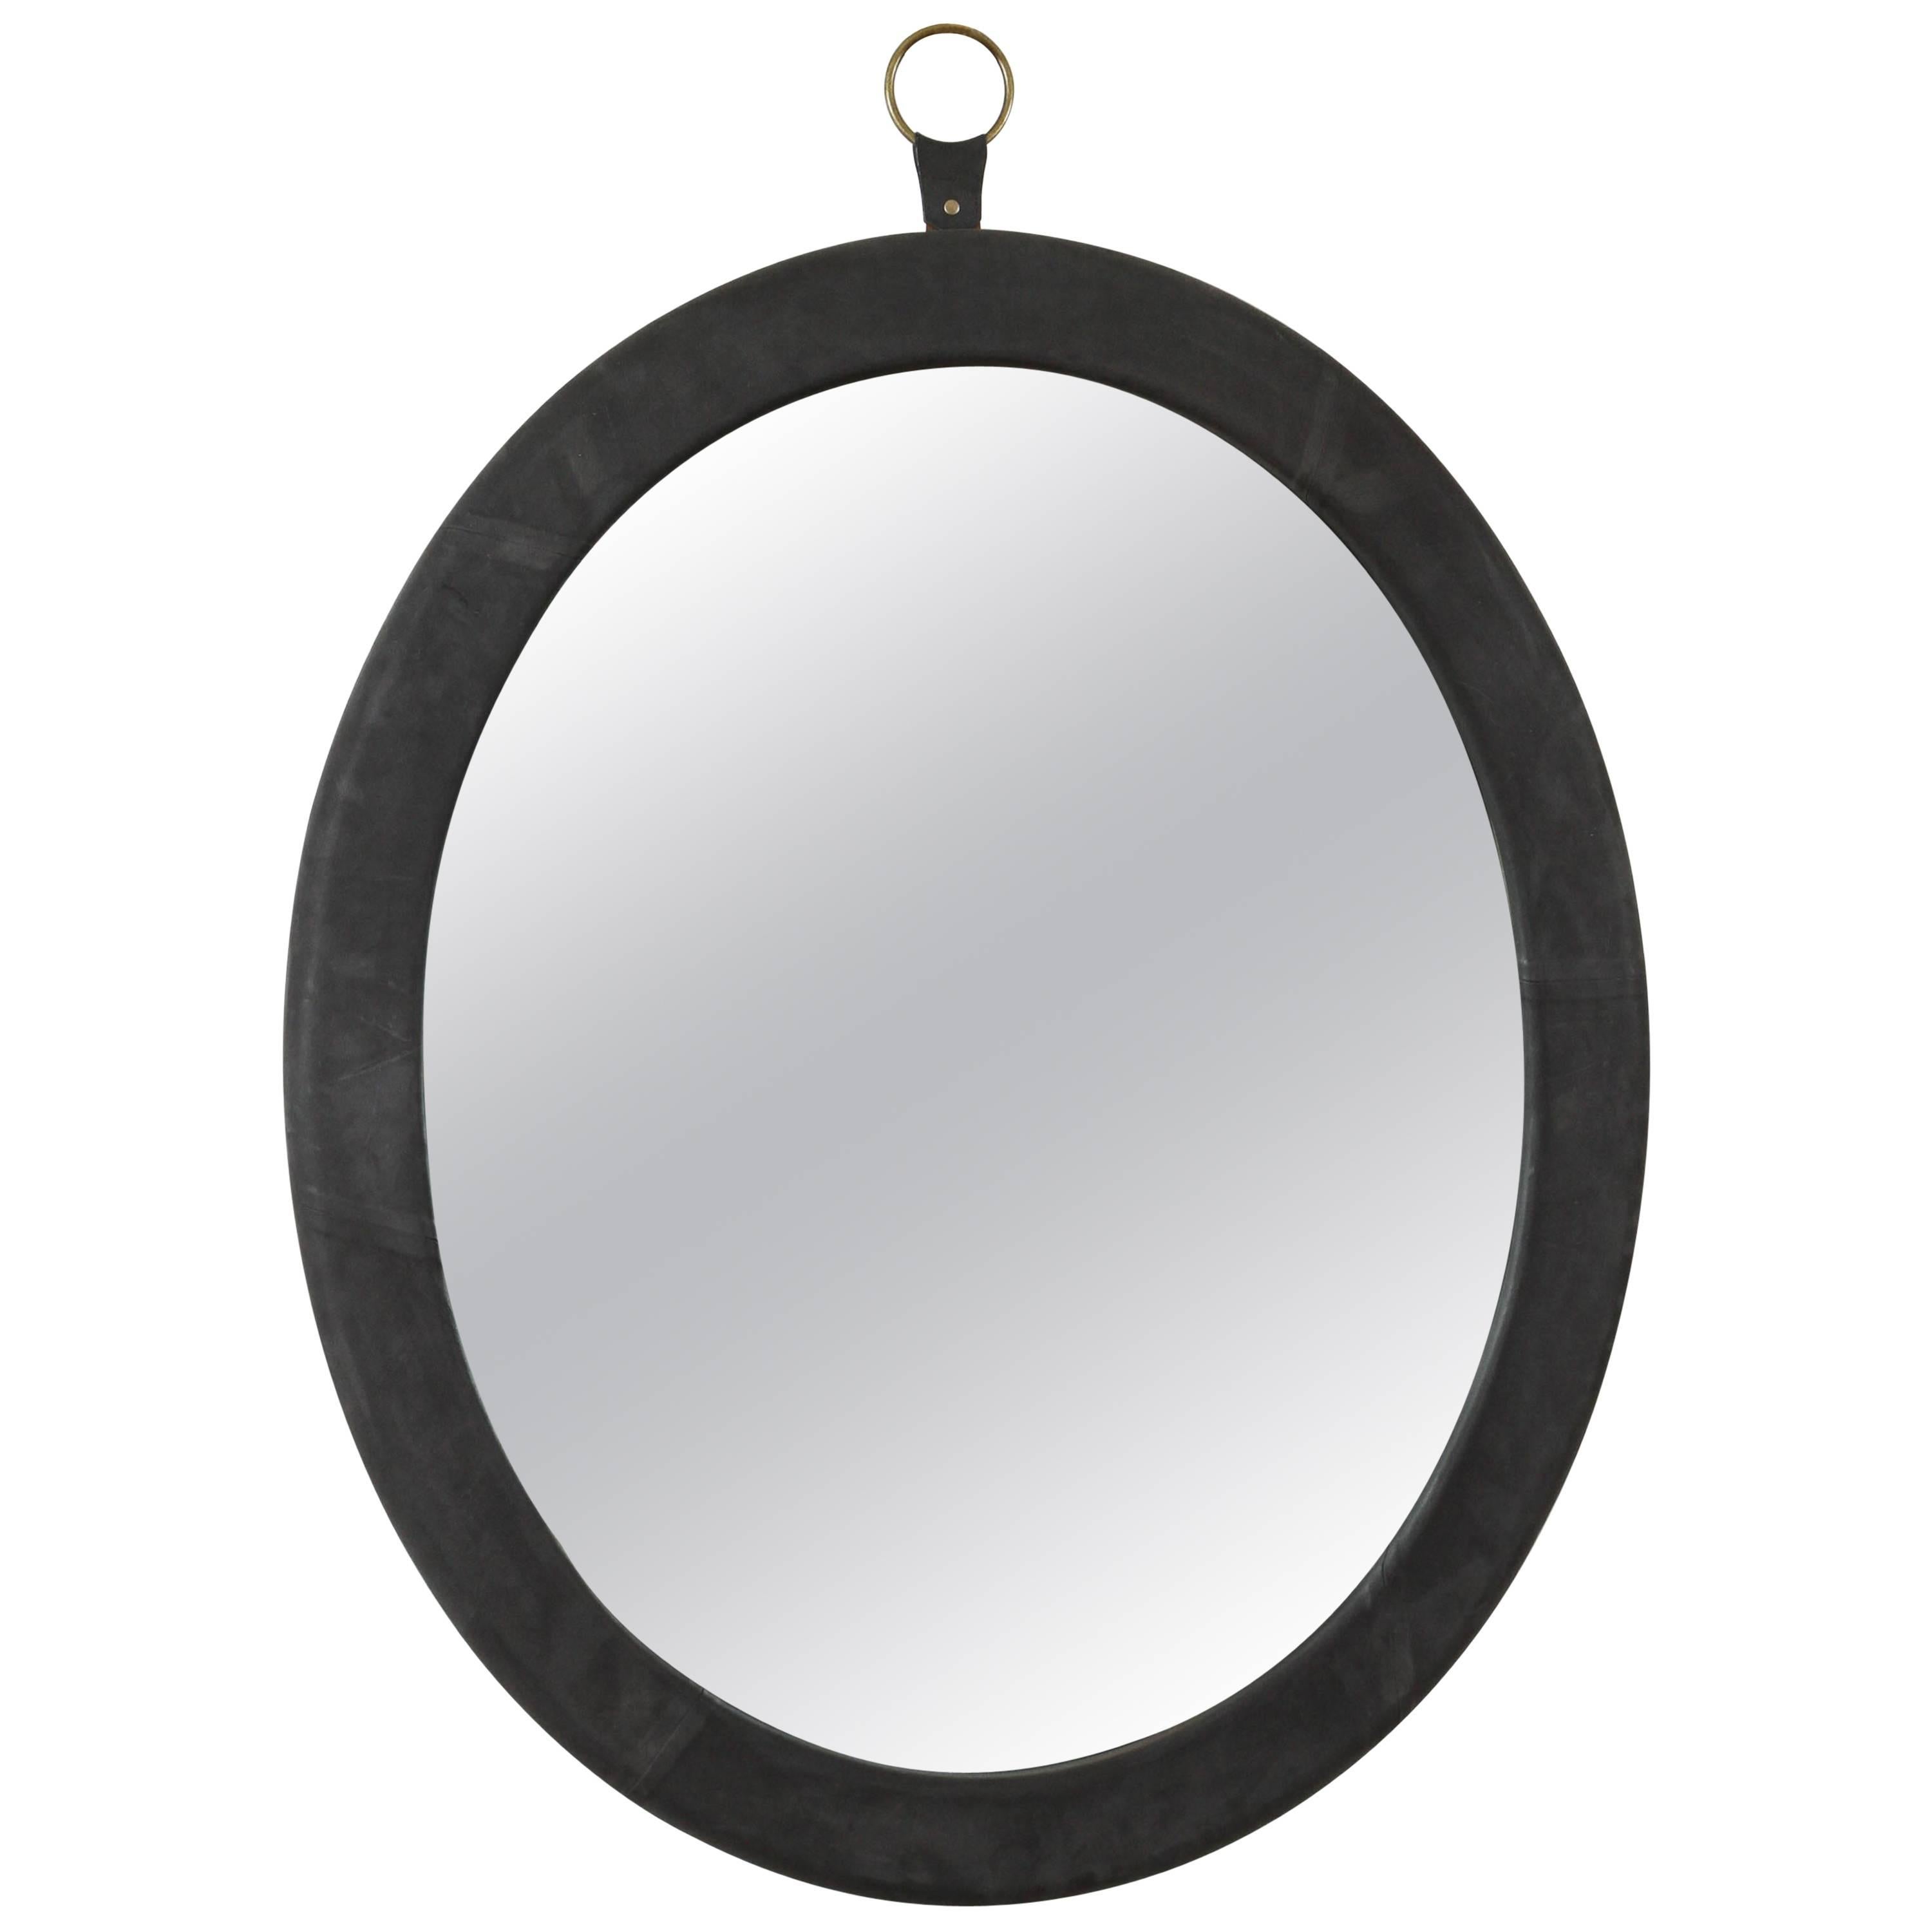 Leather Oval Mirror by Jason Koharik for Collected by